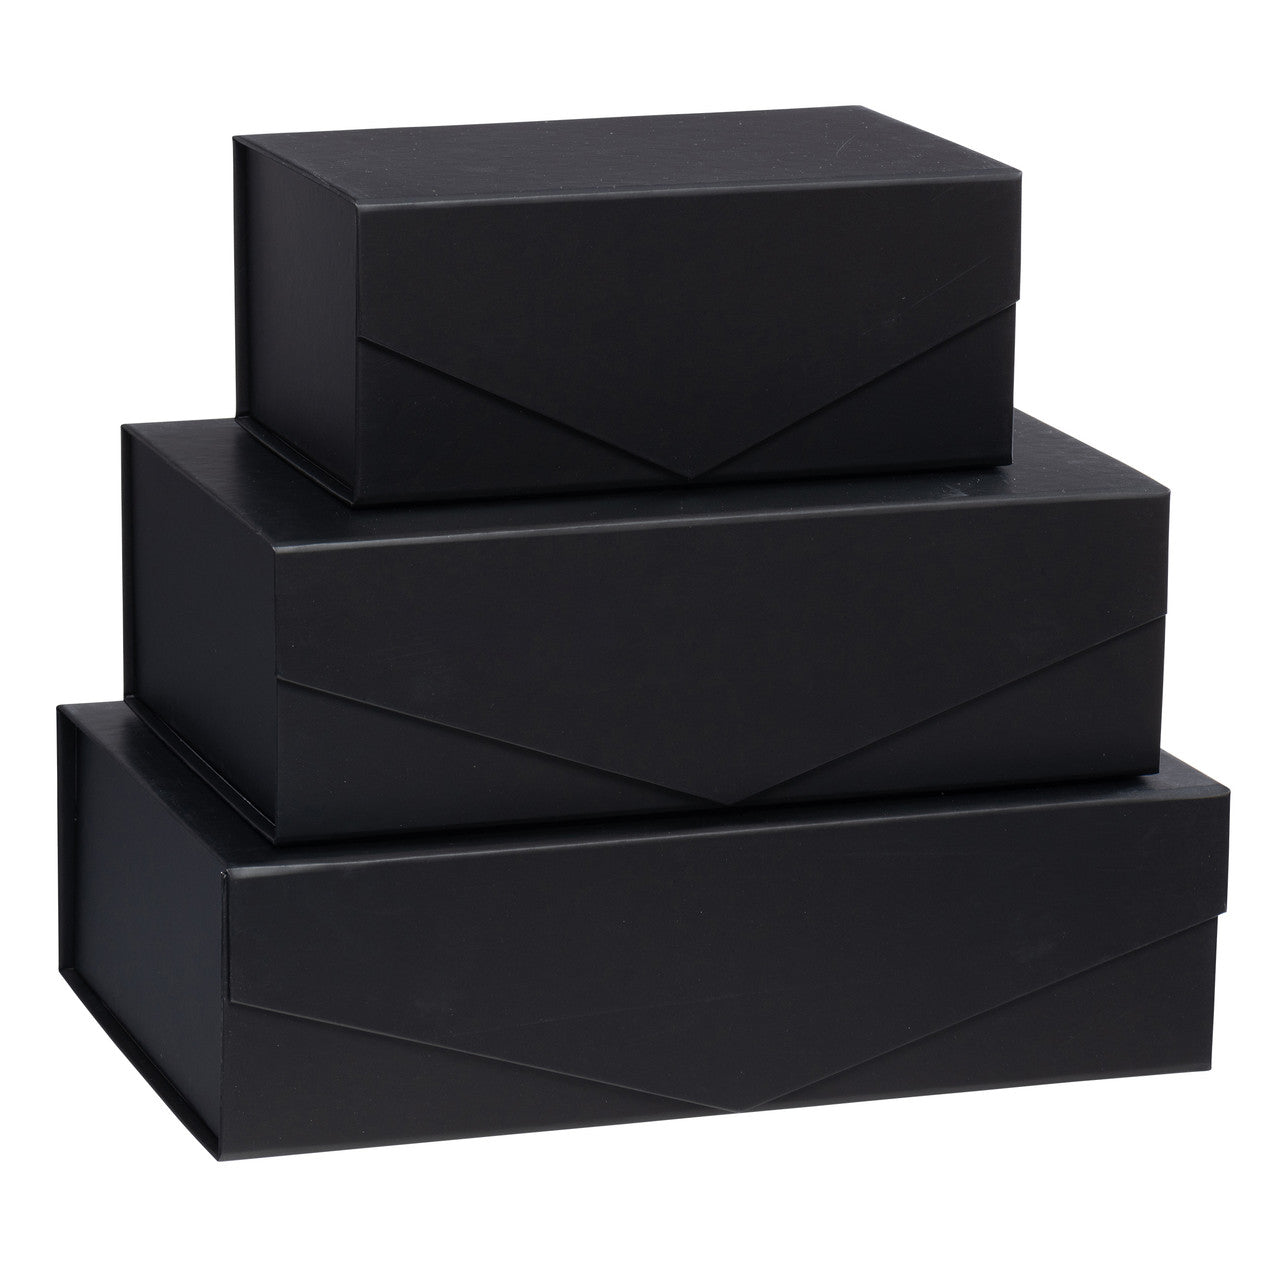 Gift Boxes- Black Magnetic Lid